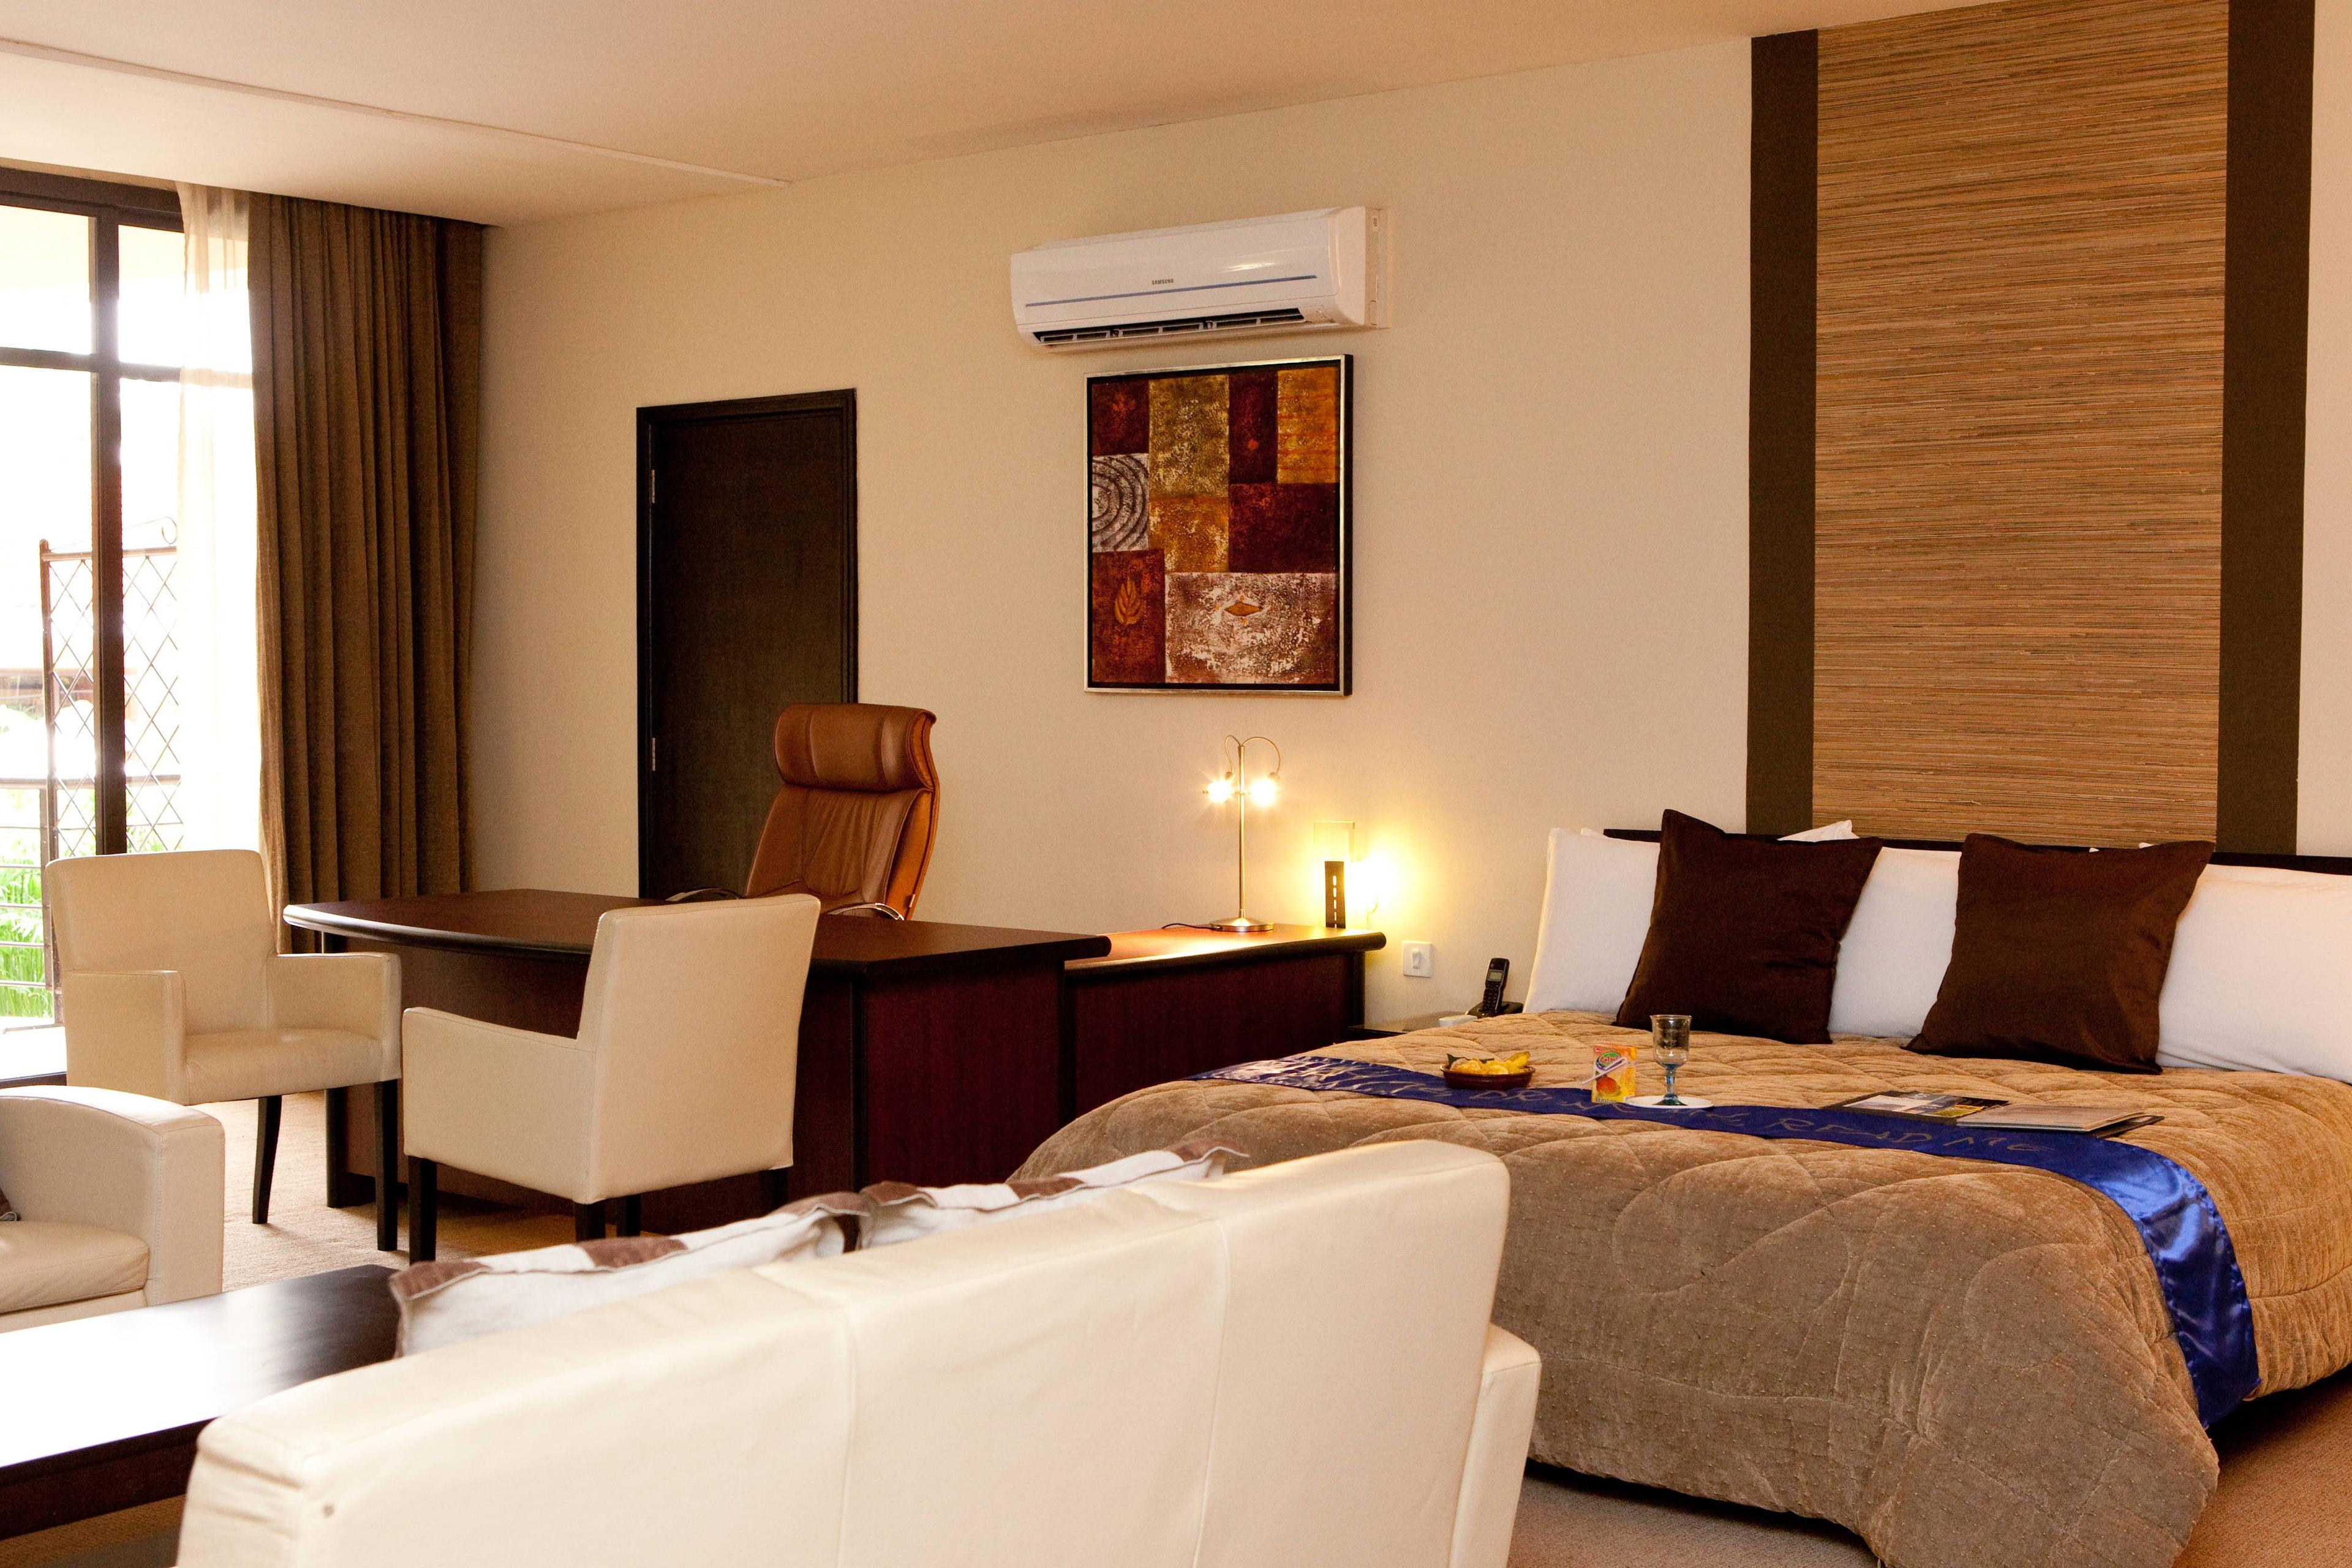 Our elegant suites make this hotel the perfect choice in the heart of Uganda’s capital.